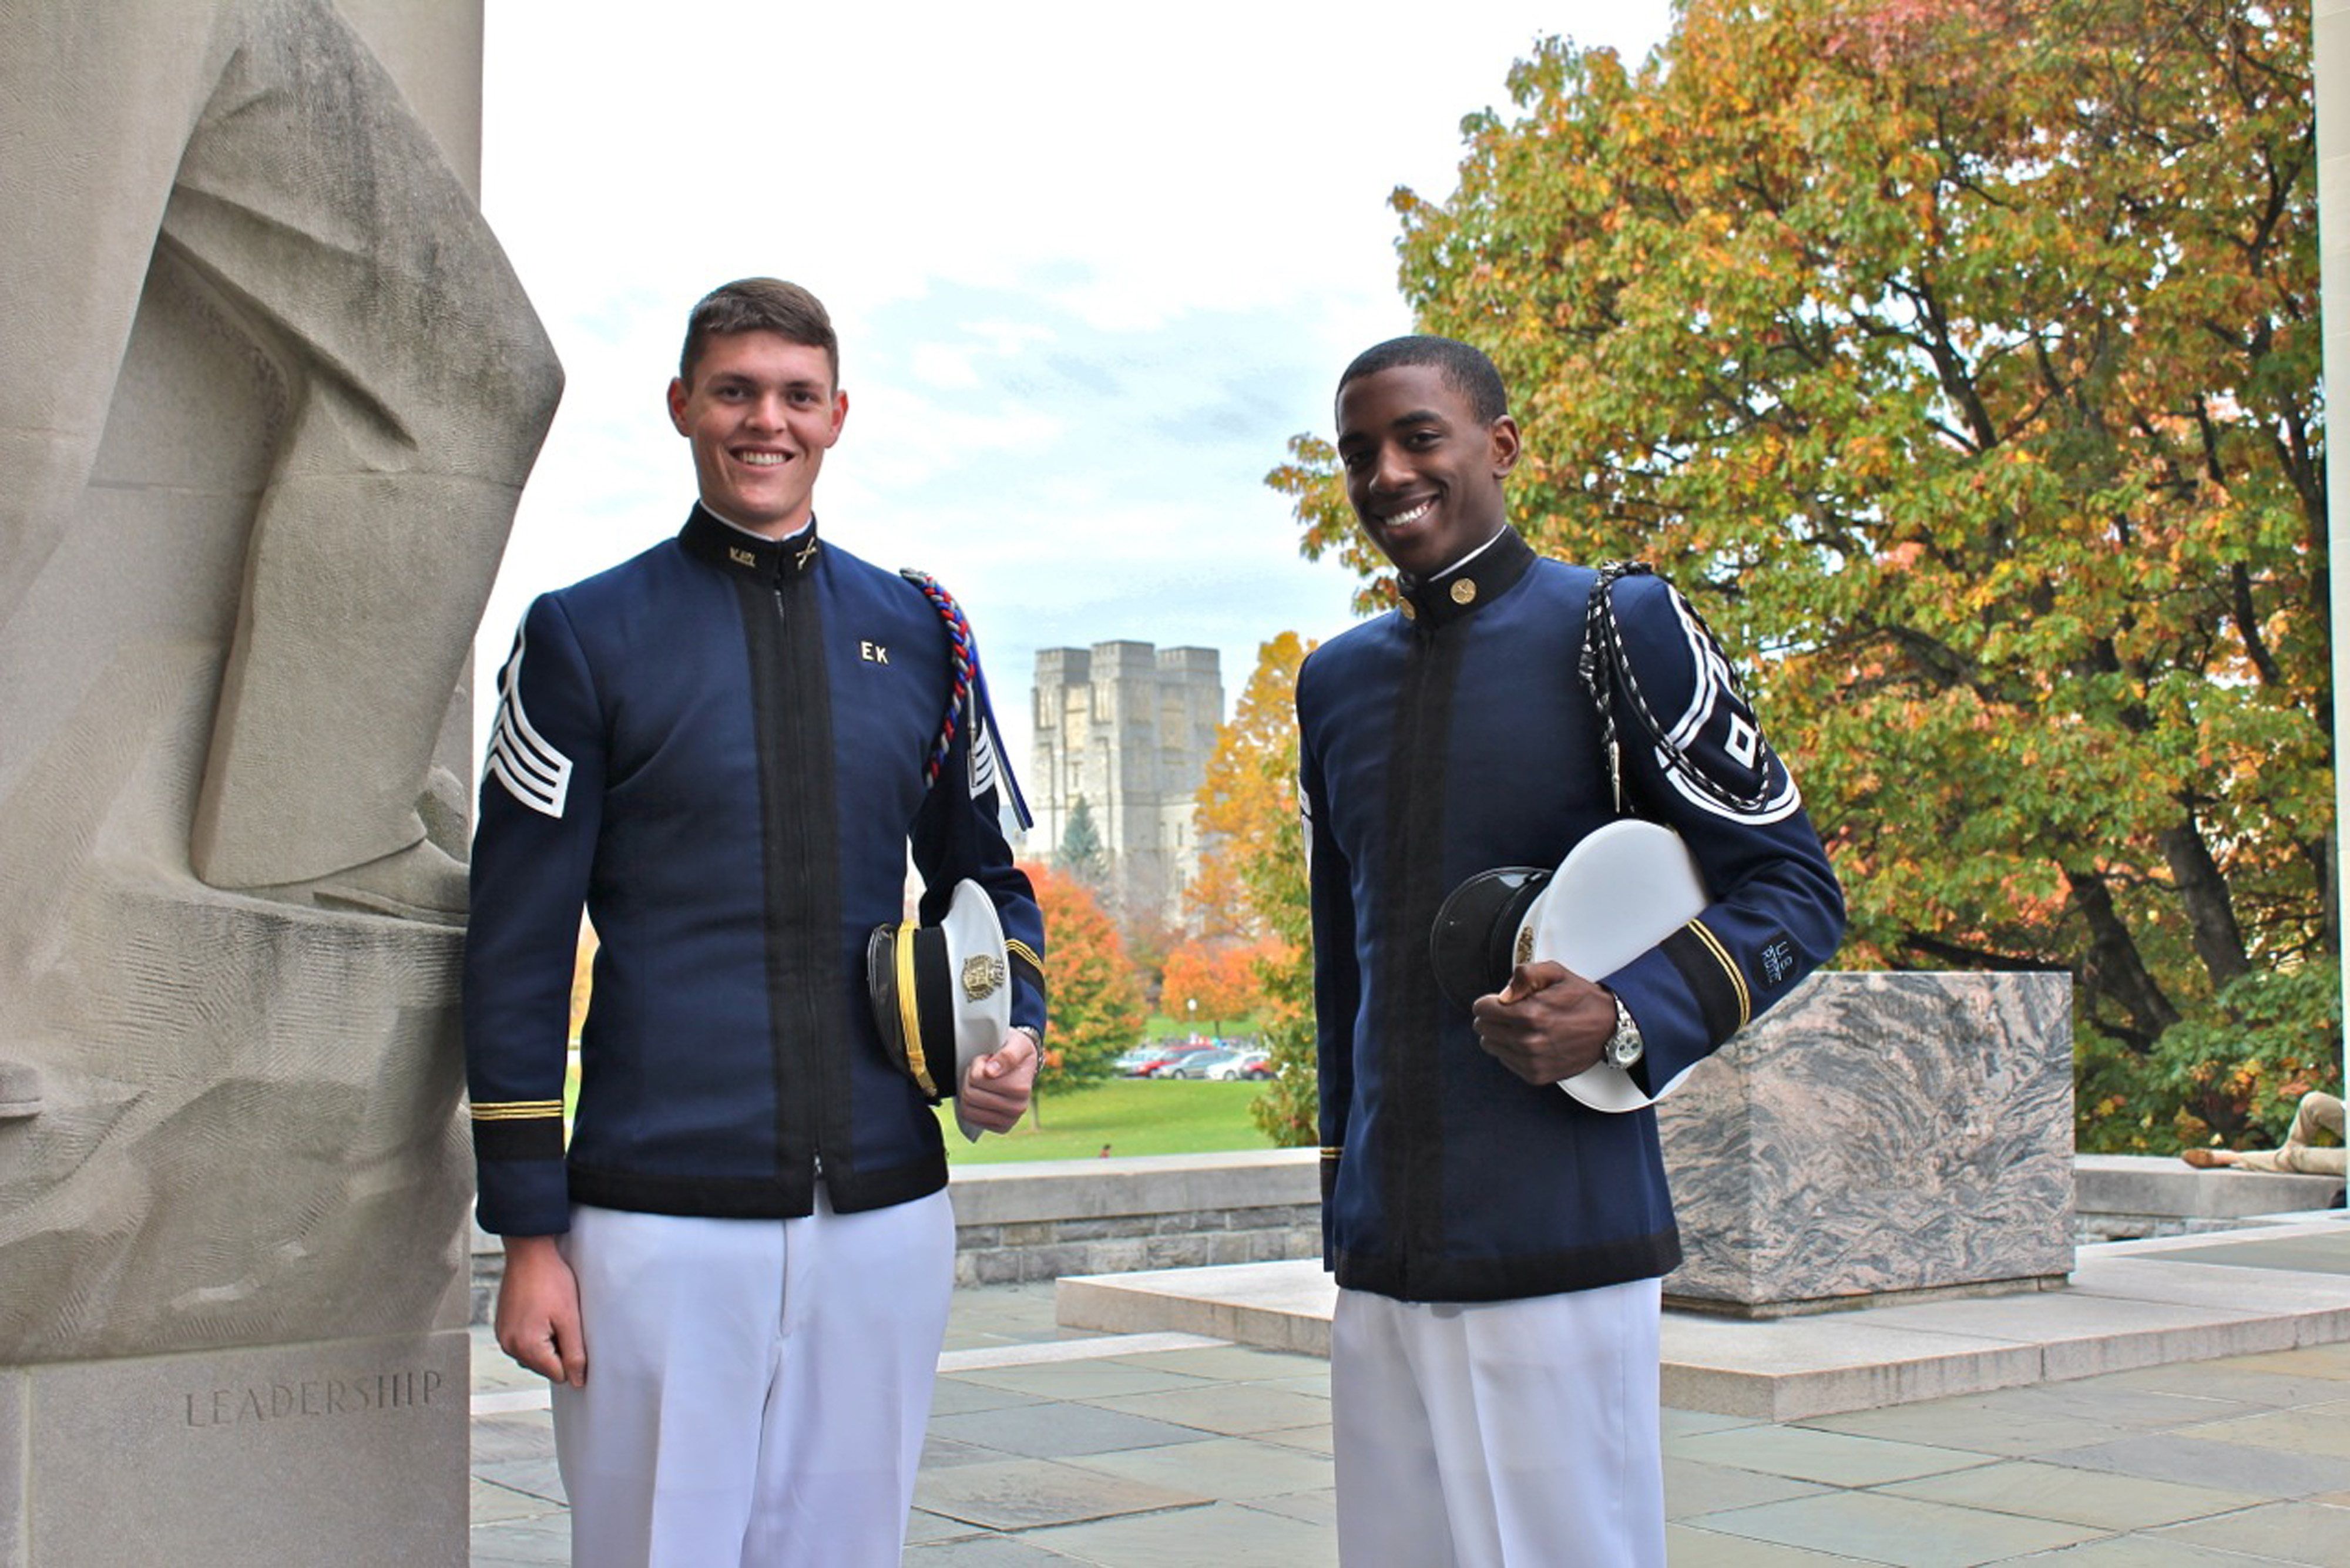 From left to right are Cadets James Harvey and Luke Carpenter standing at the War Memorial